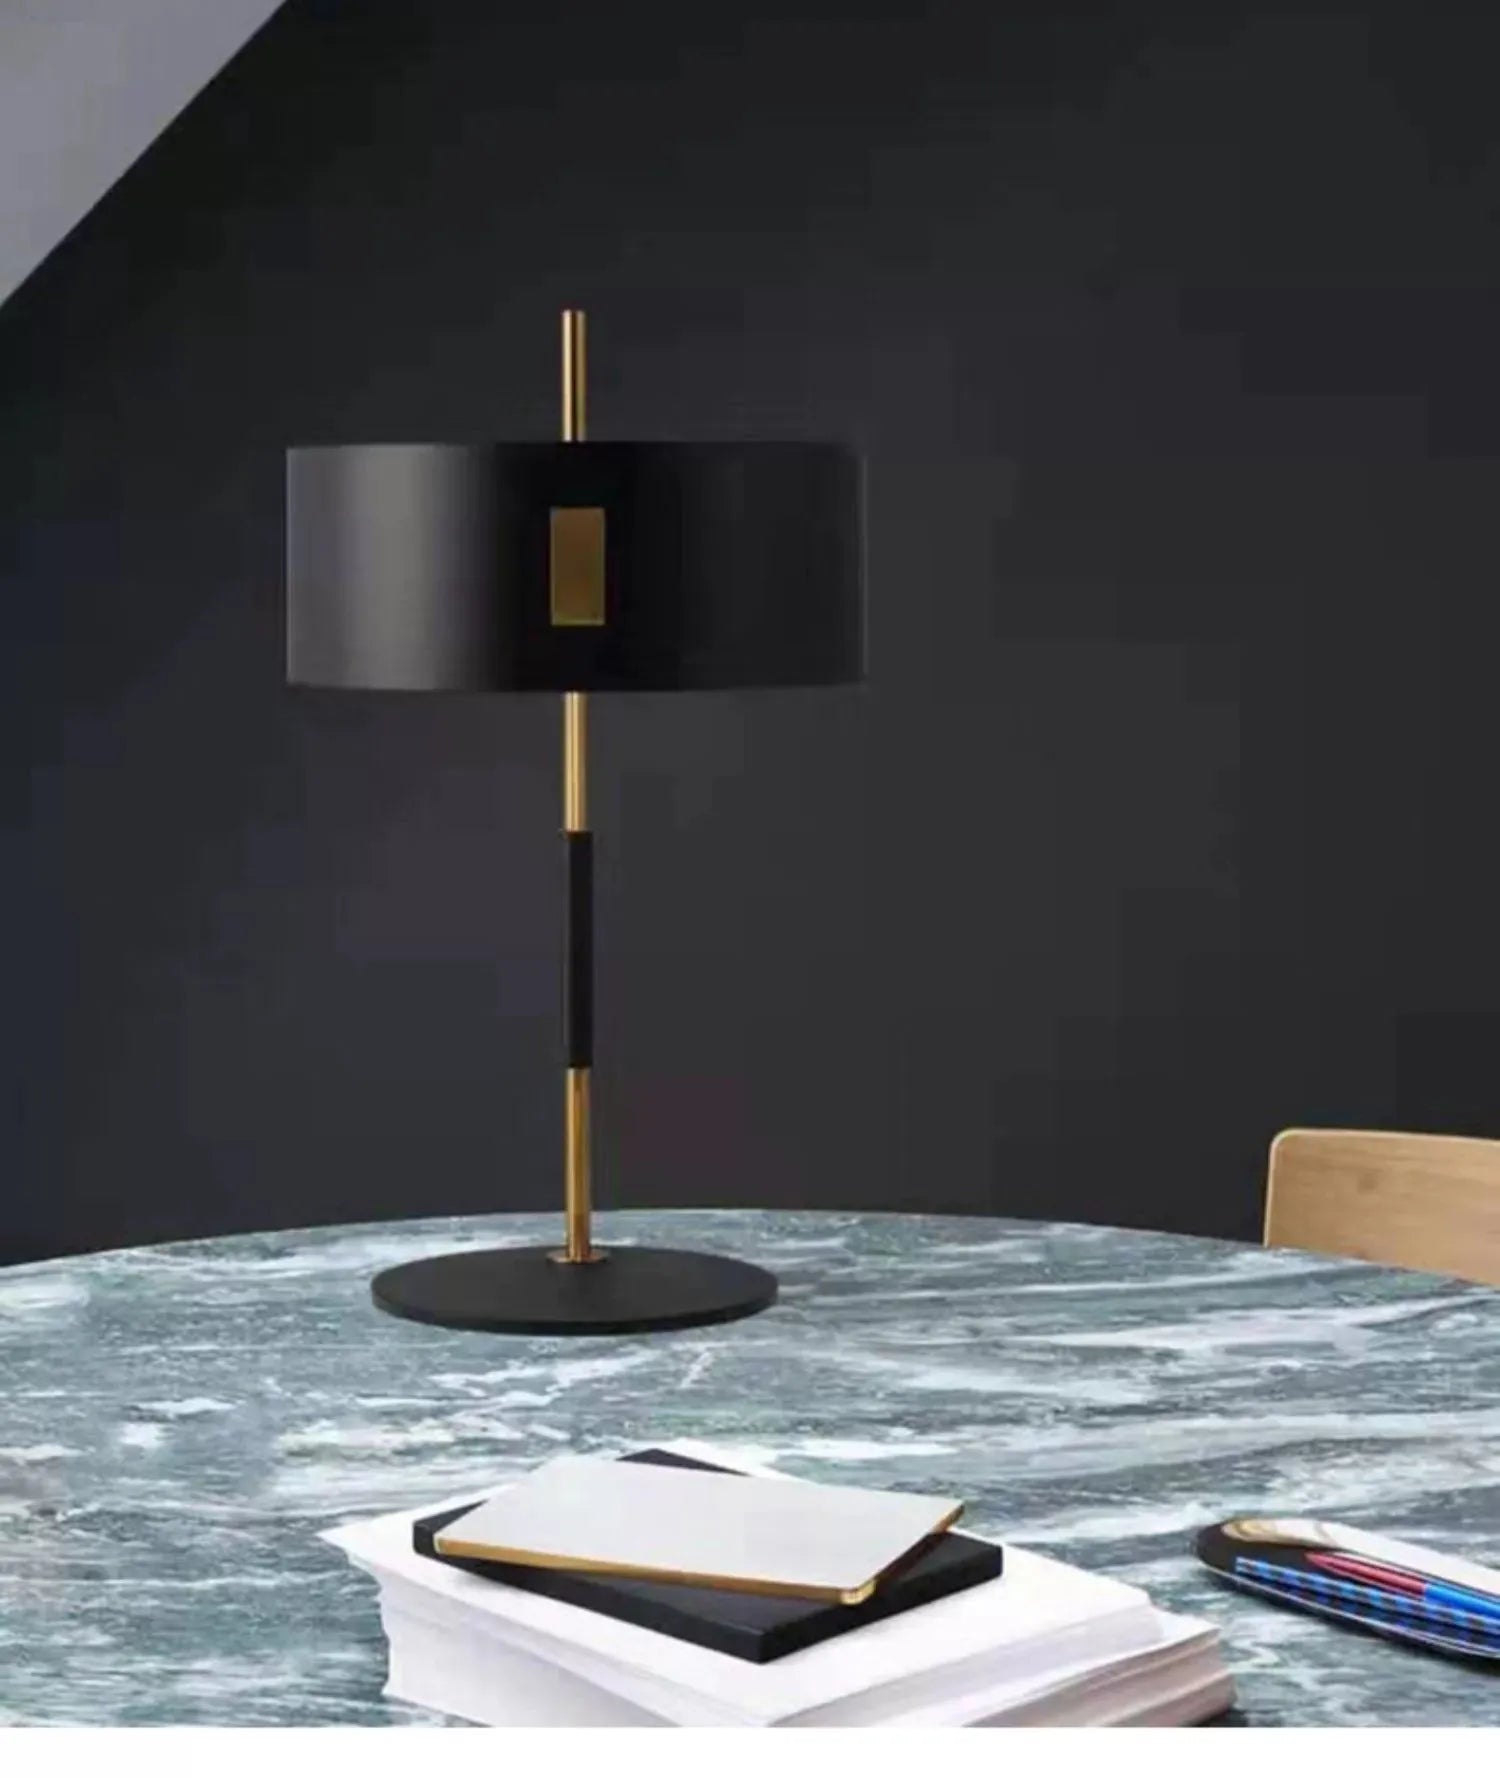 Modern Creative Led Floor Lamp, Used In The Living Room Next To The